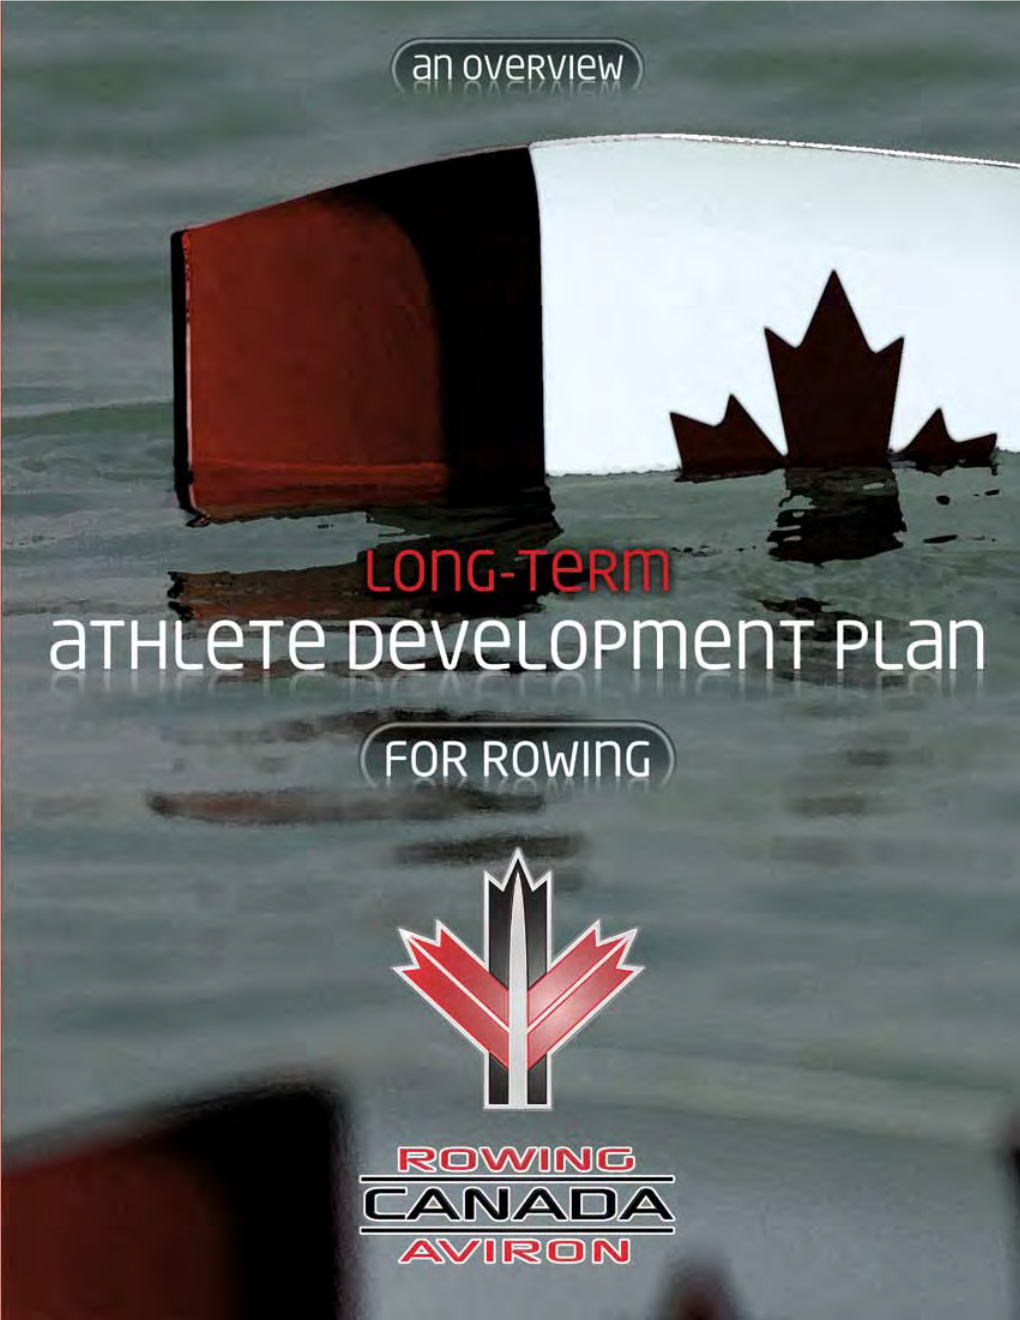 Learn More About Rowing's Long-Term